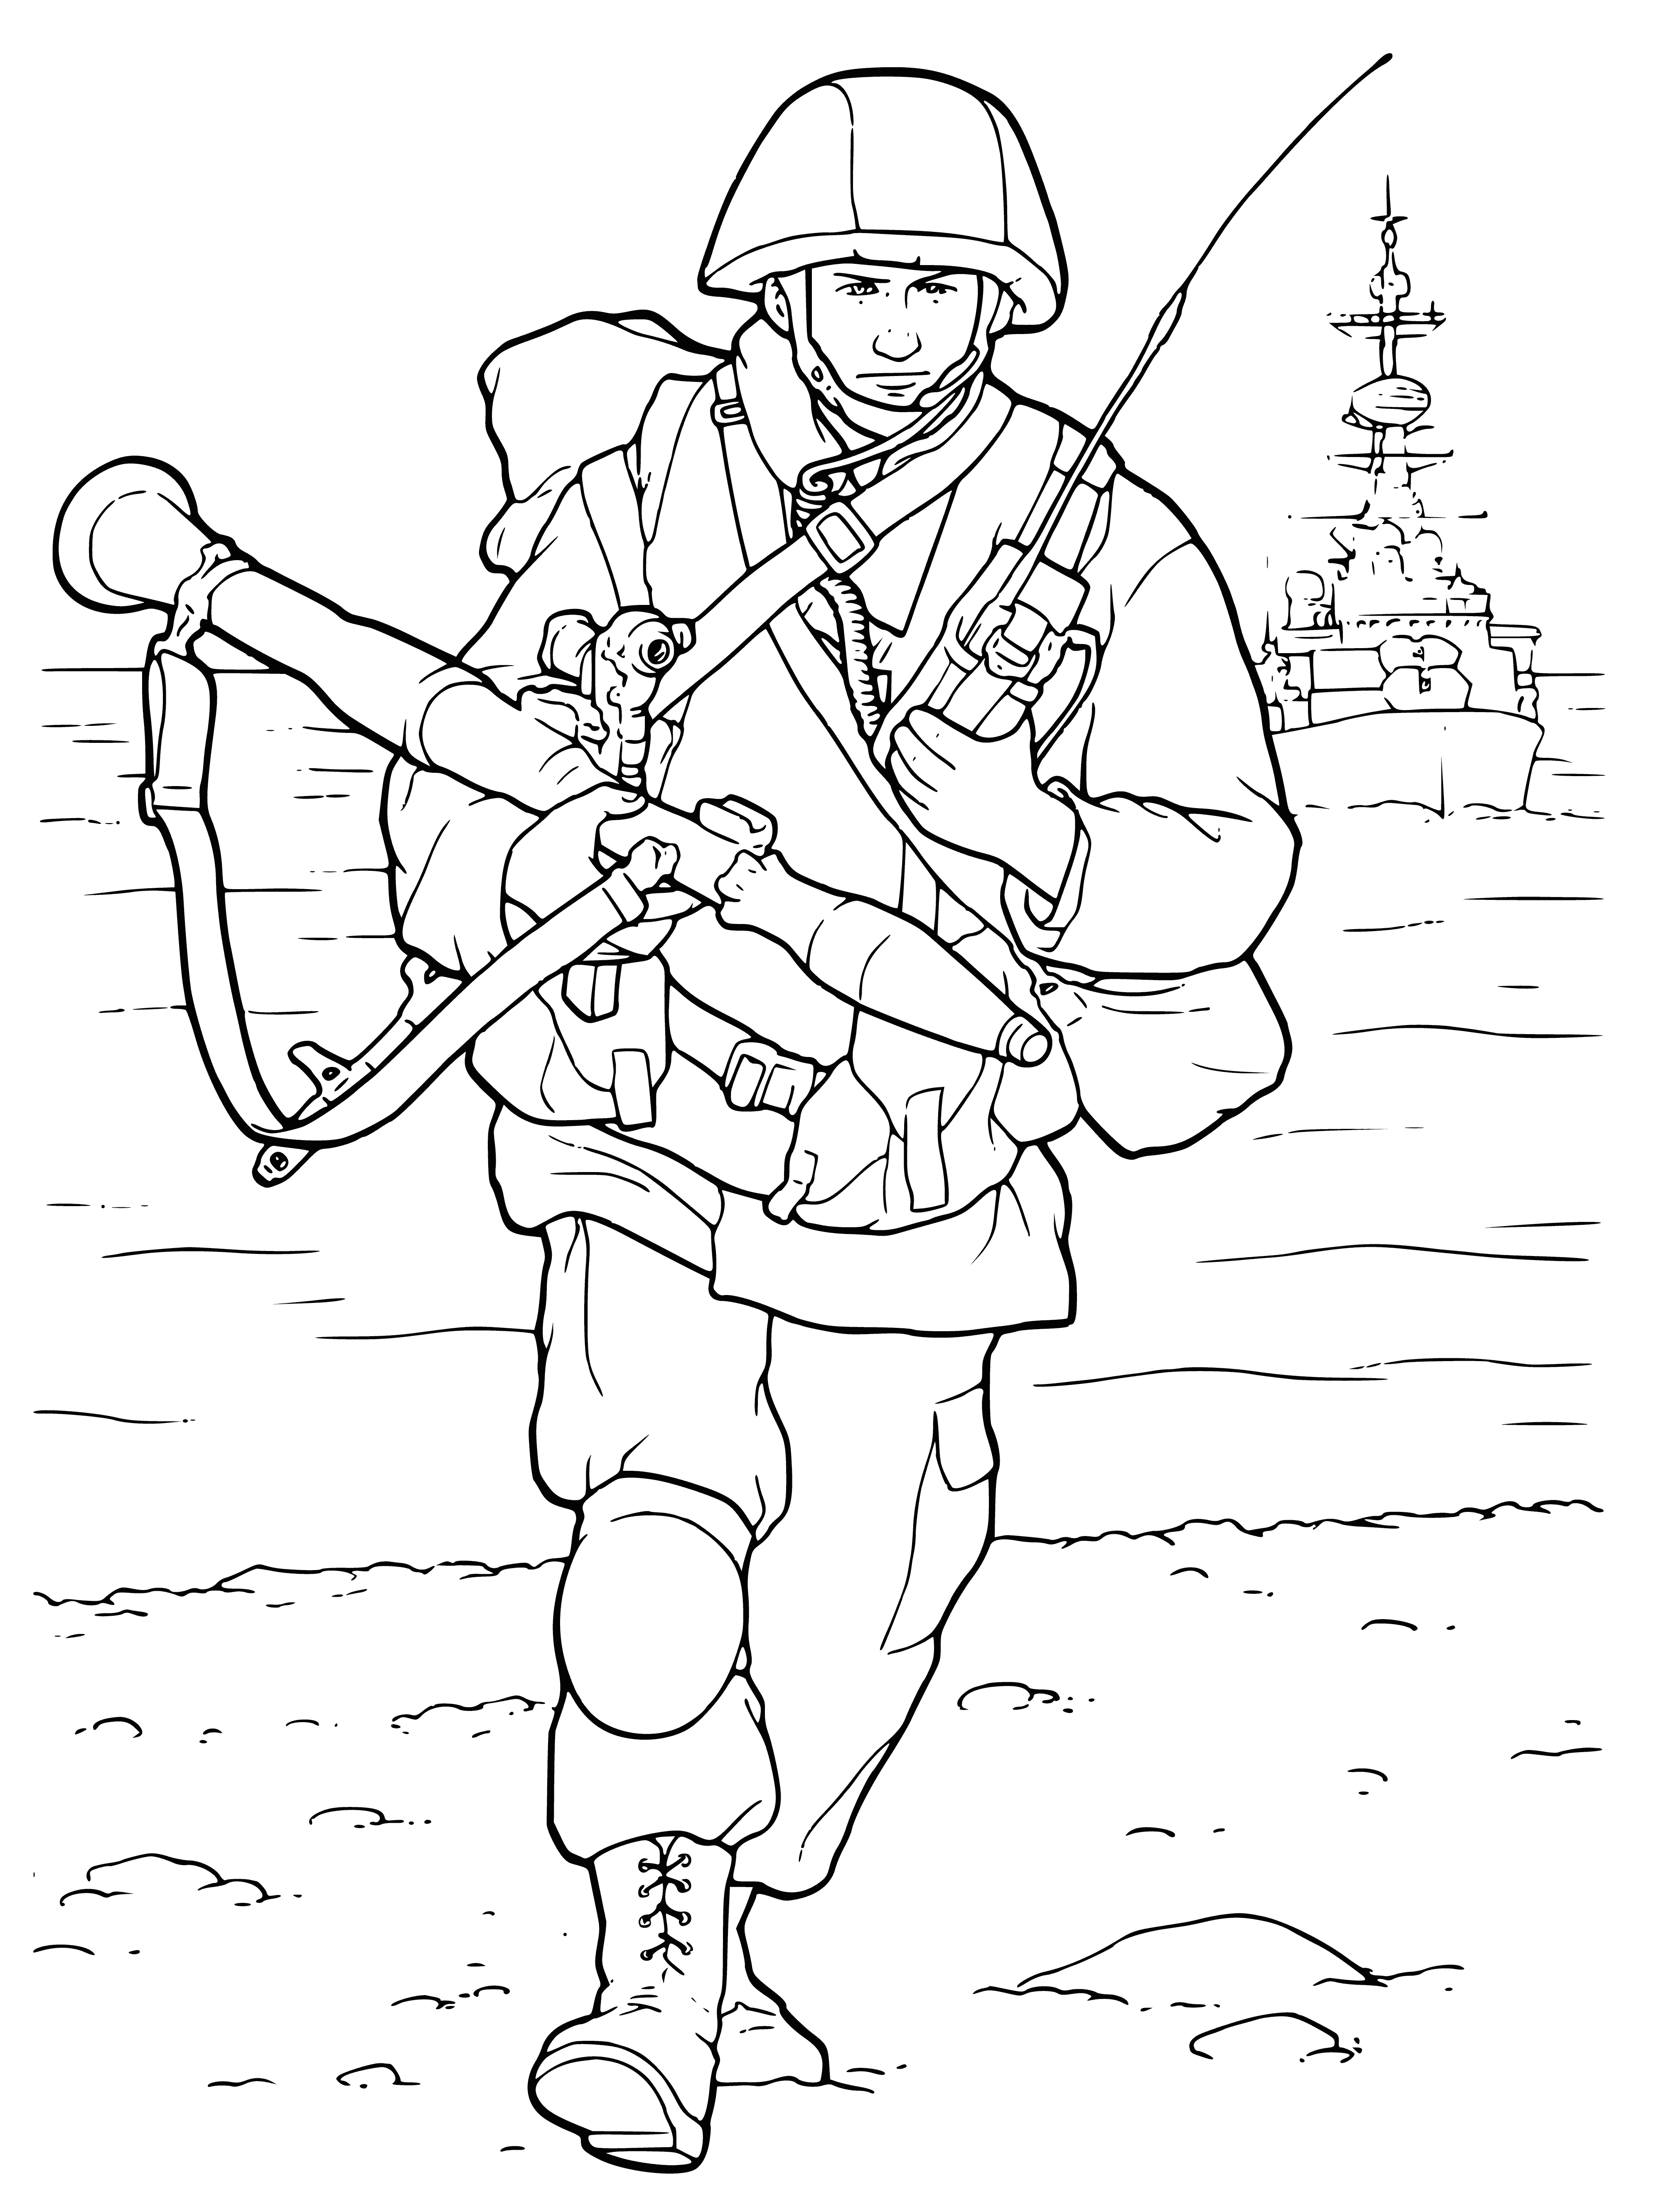 Marine Corps soldier coloring page